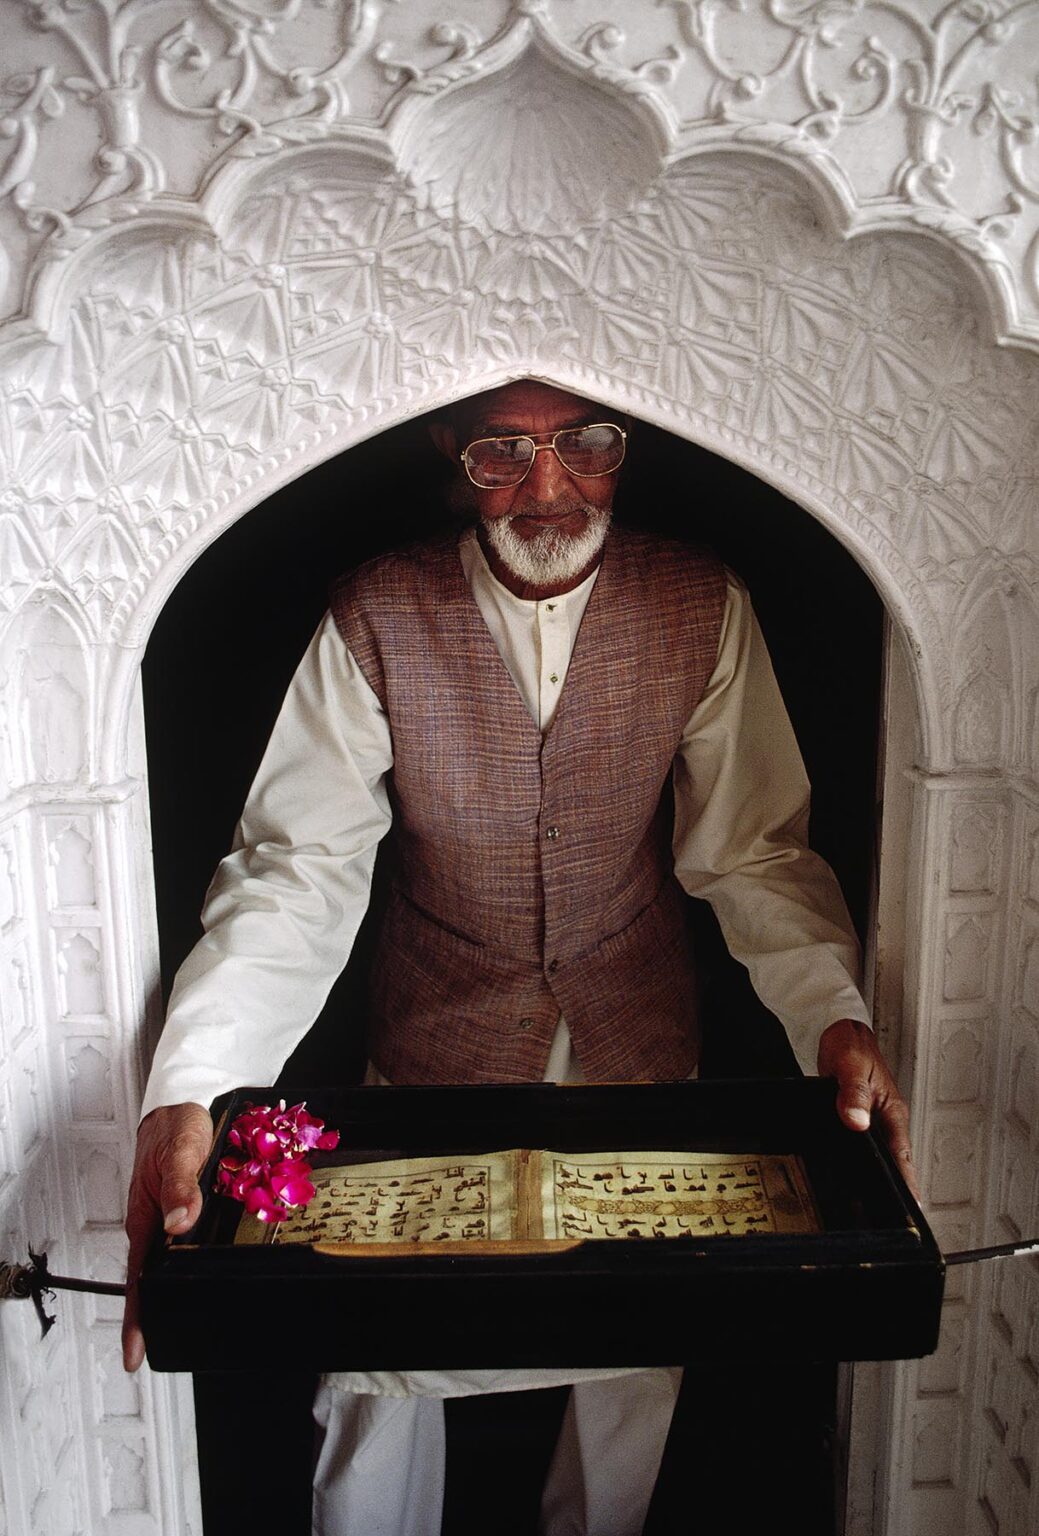 A Muslim CLERIC displays MOHAMMED'S SCRIPTURES at the JAMA MASJID MOSQUE - DELHI, INDIA